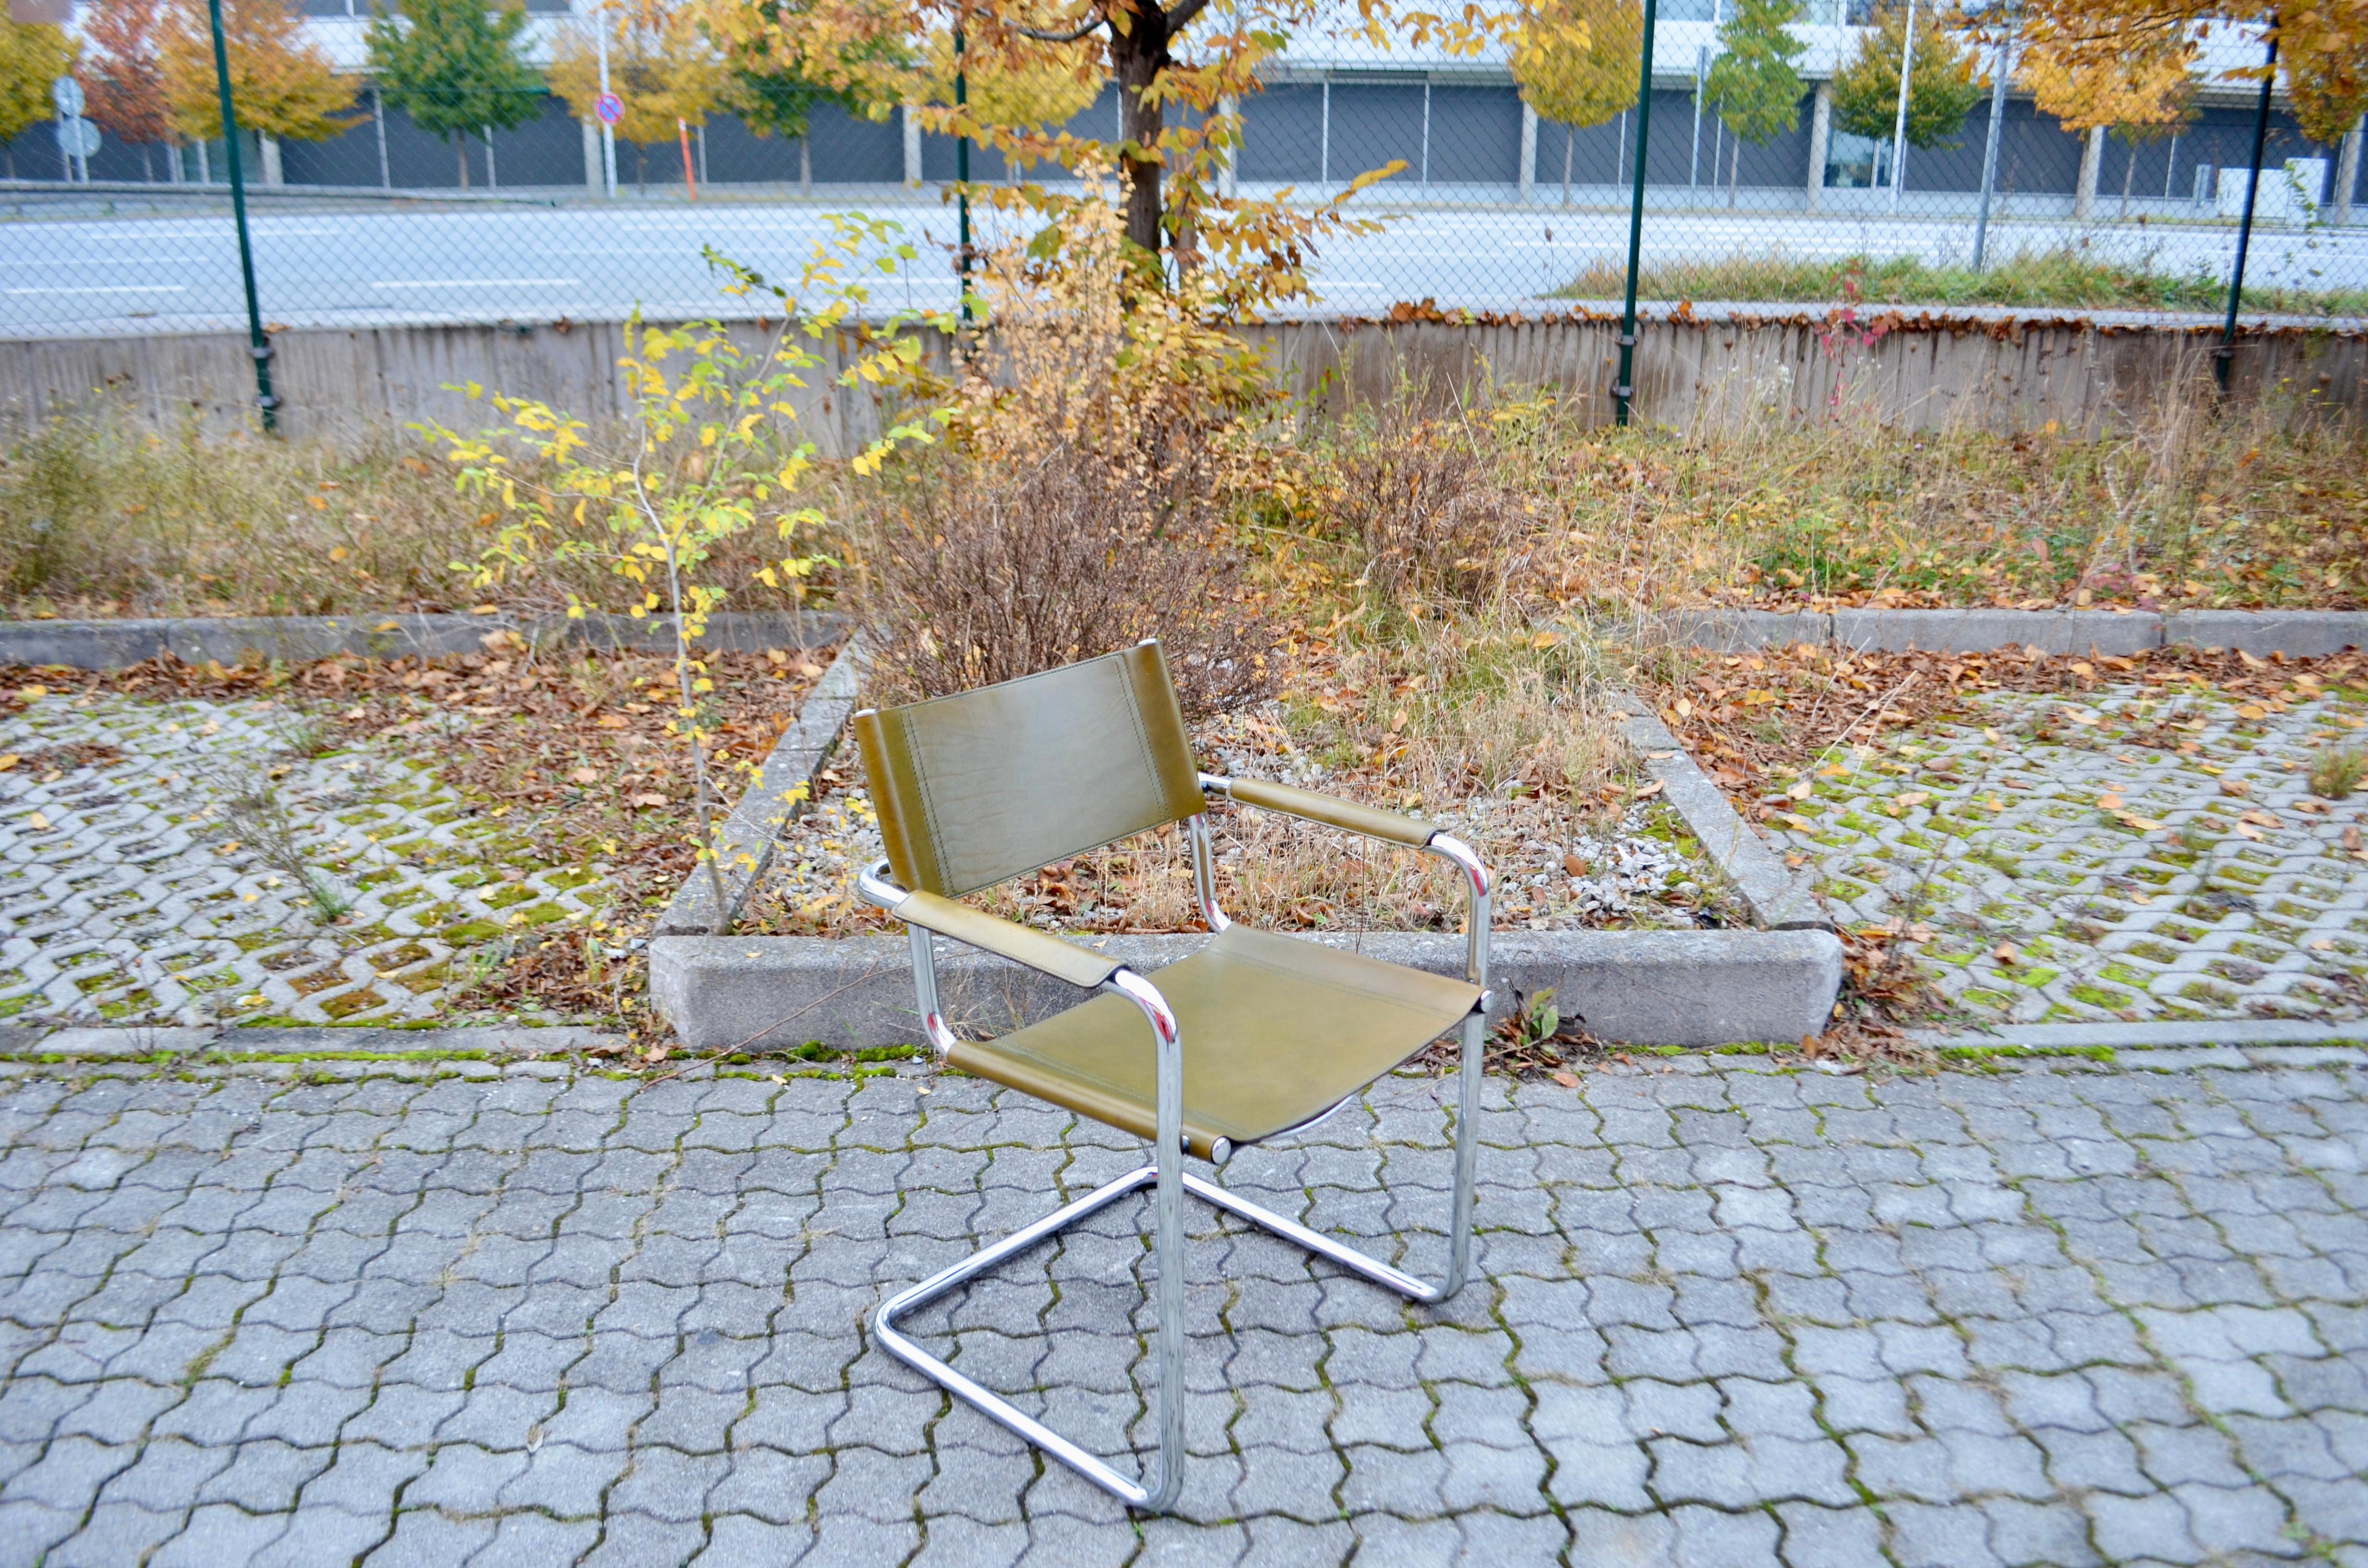 Vintage Cantilever chair by Centro Studi for Matteo Grassi Modell MG.
This Cantilever chair is an Italian classic.
In the manner of Marcel Breuer this chairs are strongly inspired by the Bauhaus Movement.
It is the thick beautiful stunning rare